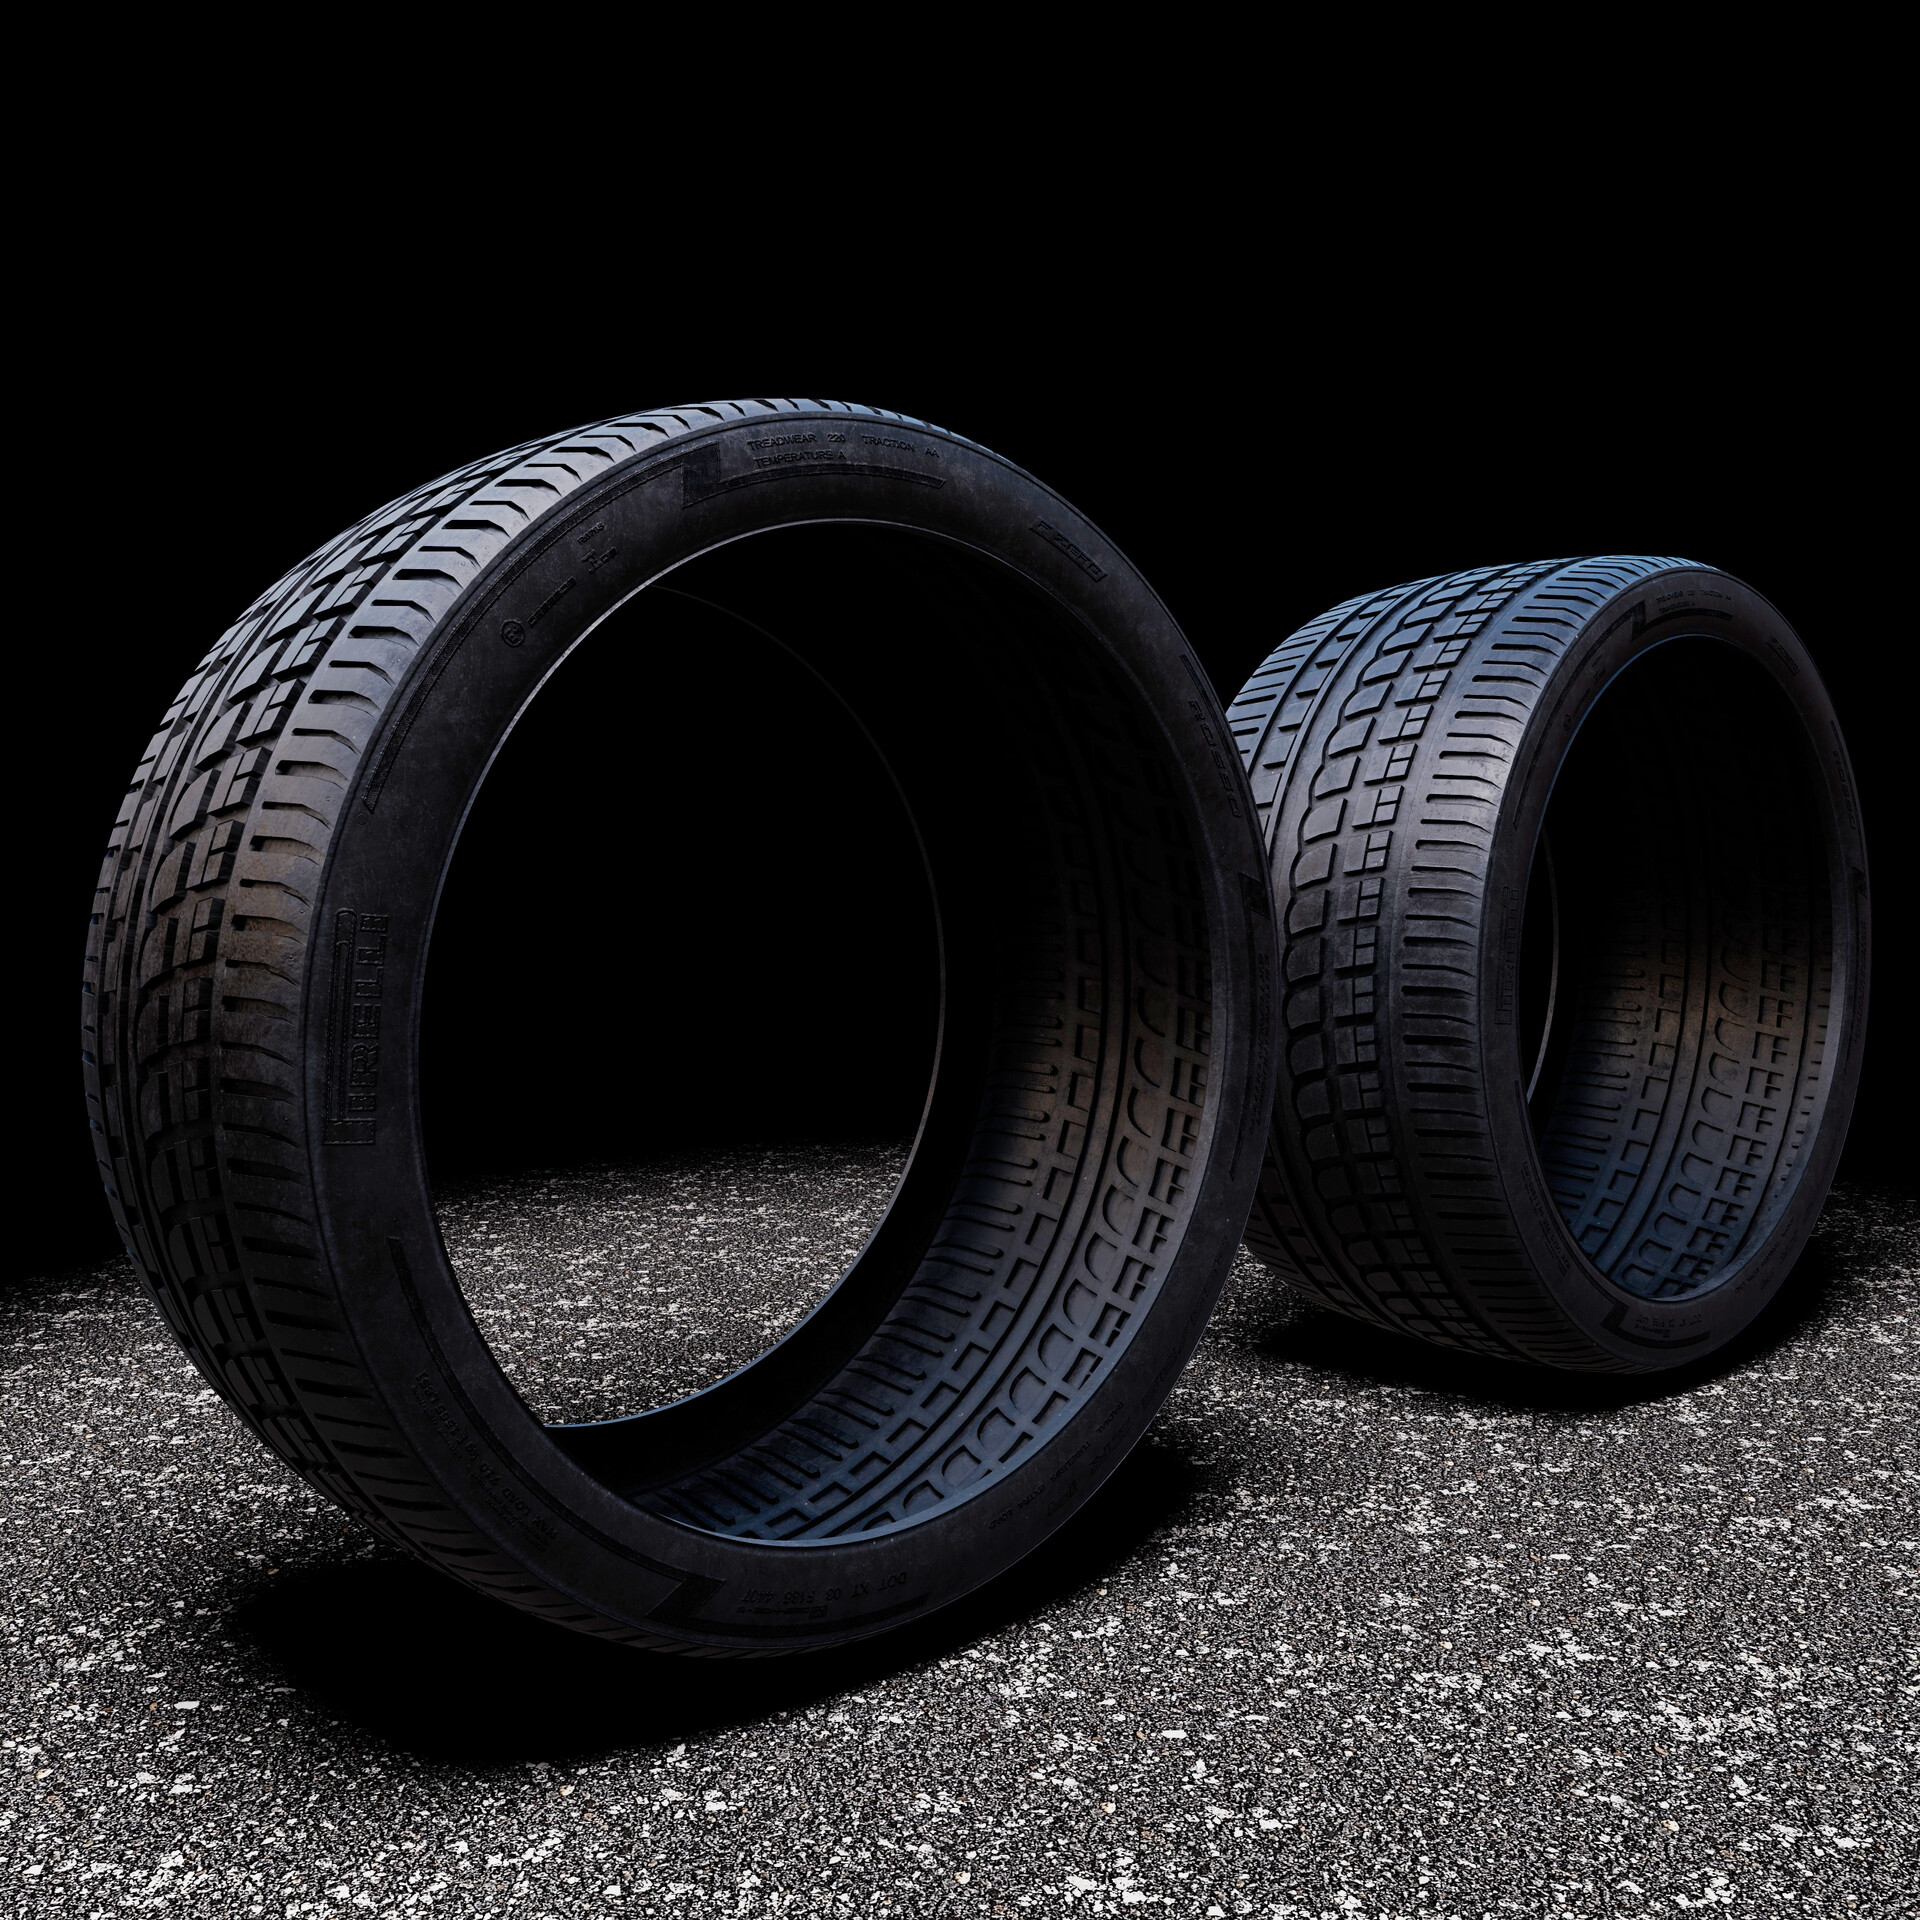 ArtStation - Work and Pirelli rims and tyre